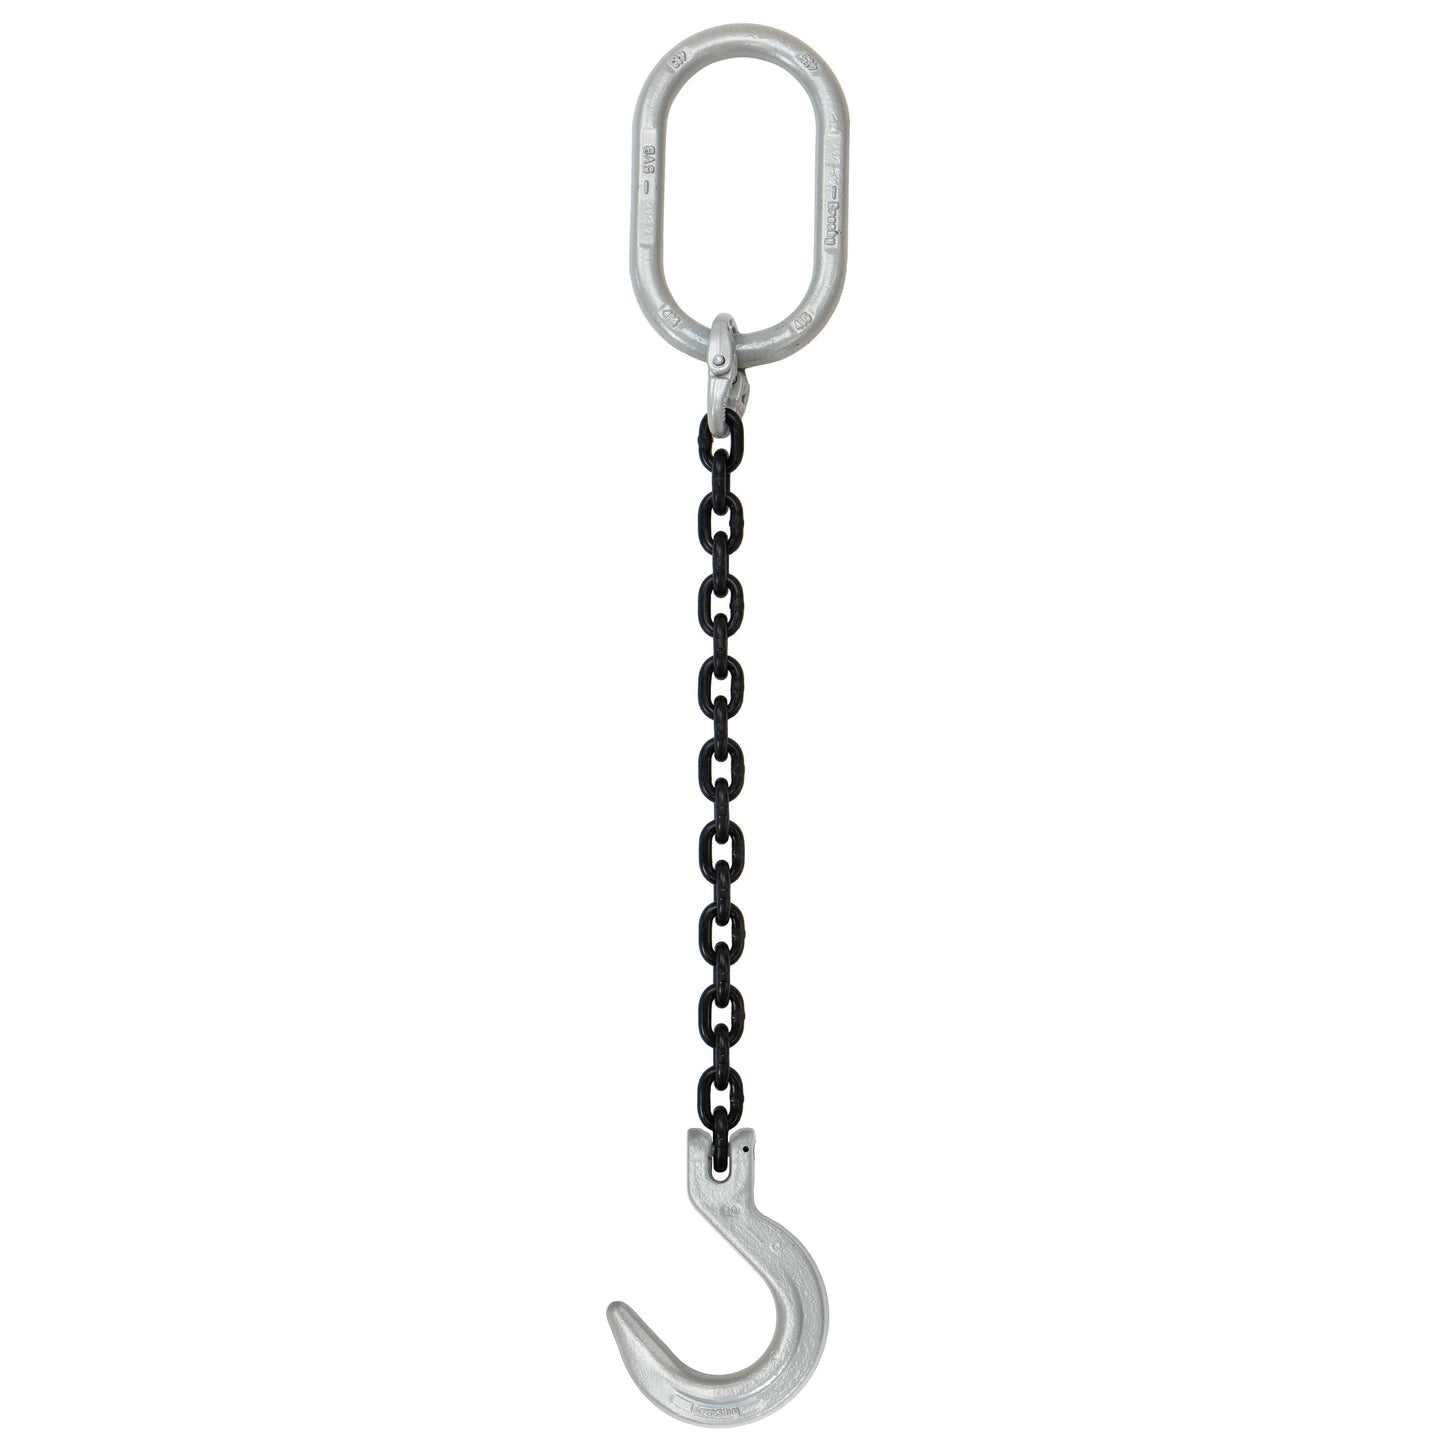 12 inch x 20 foot Domestic Single Leg Chain Sling w Crosby Foundry Hook Grade 100 image 1 of 2